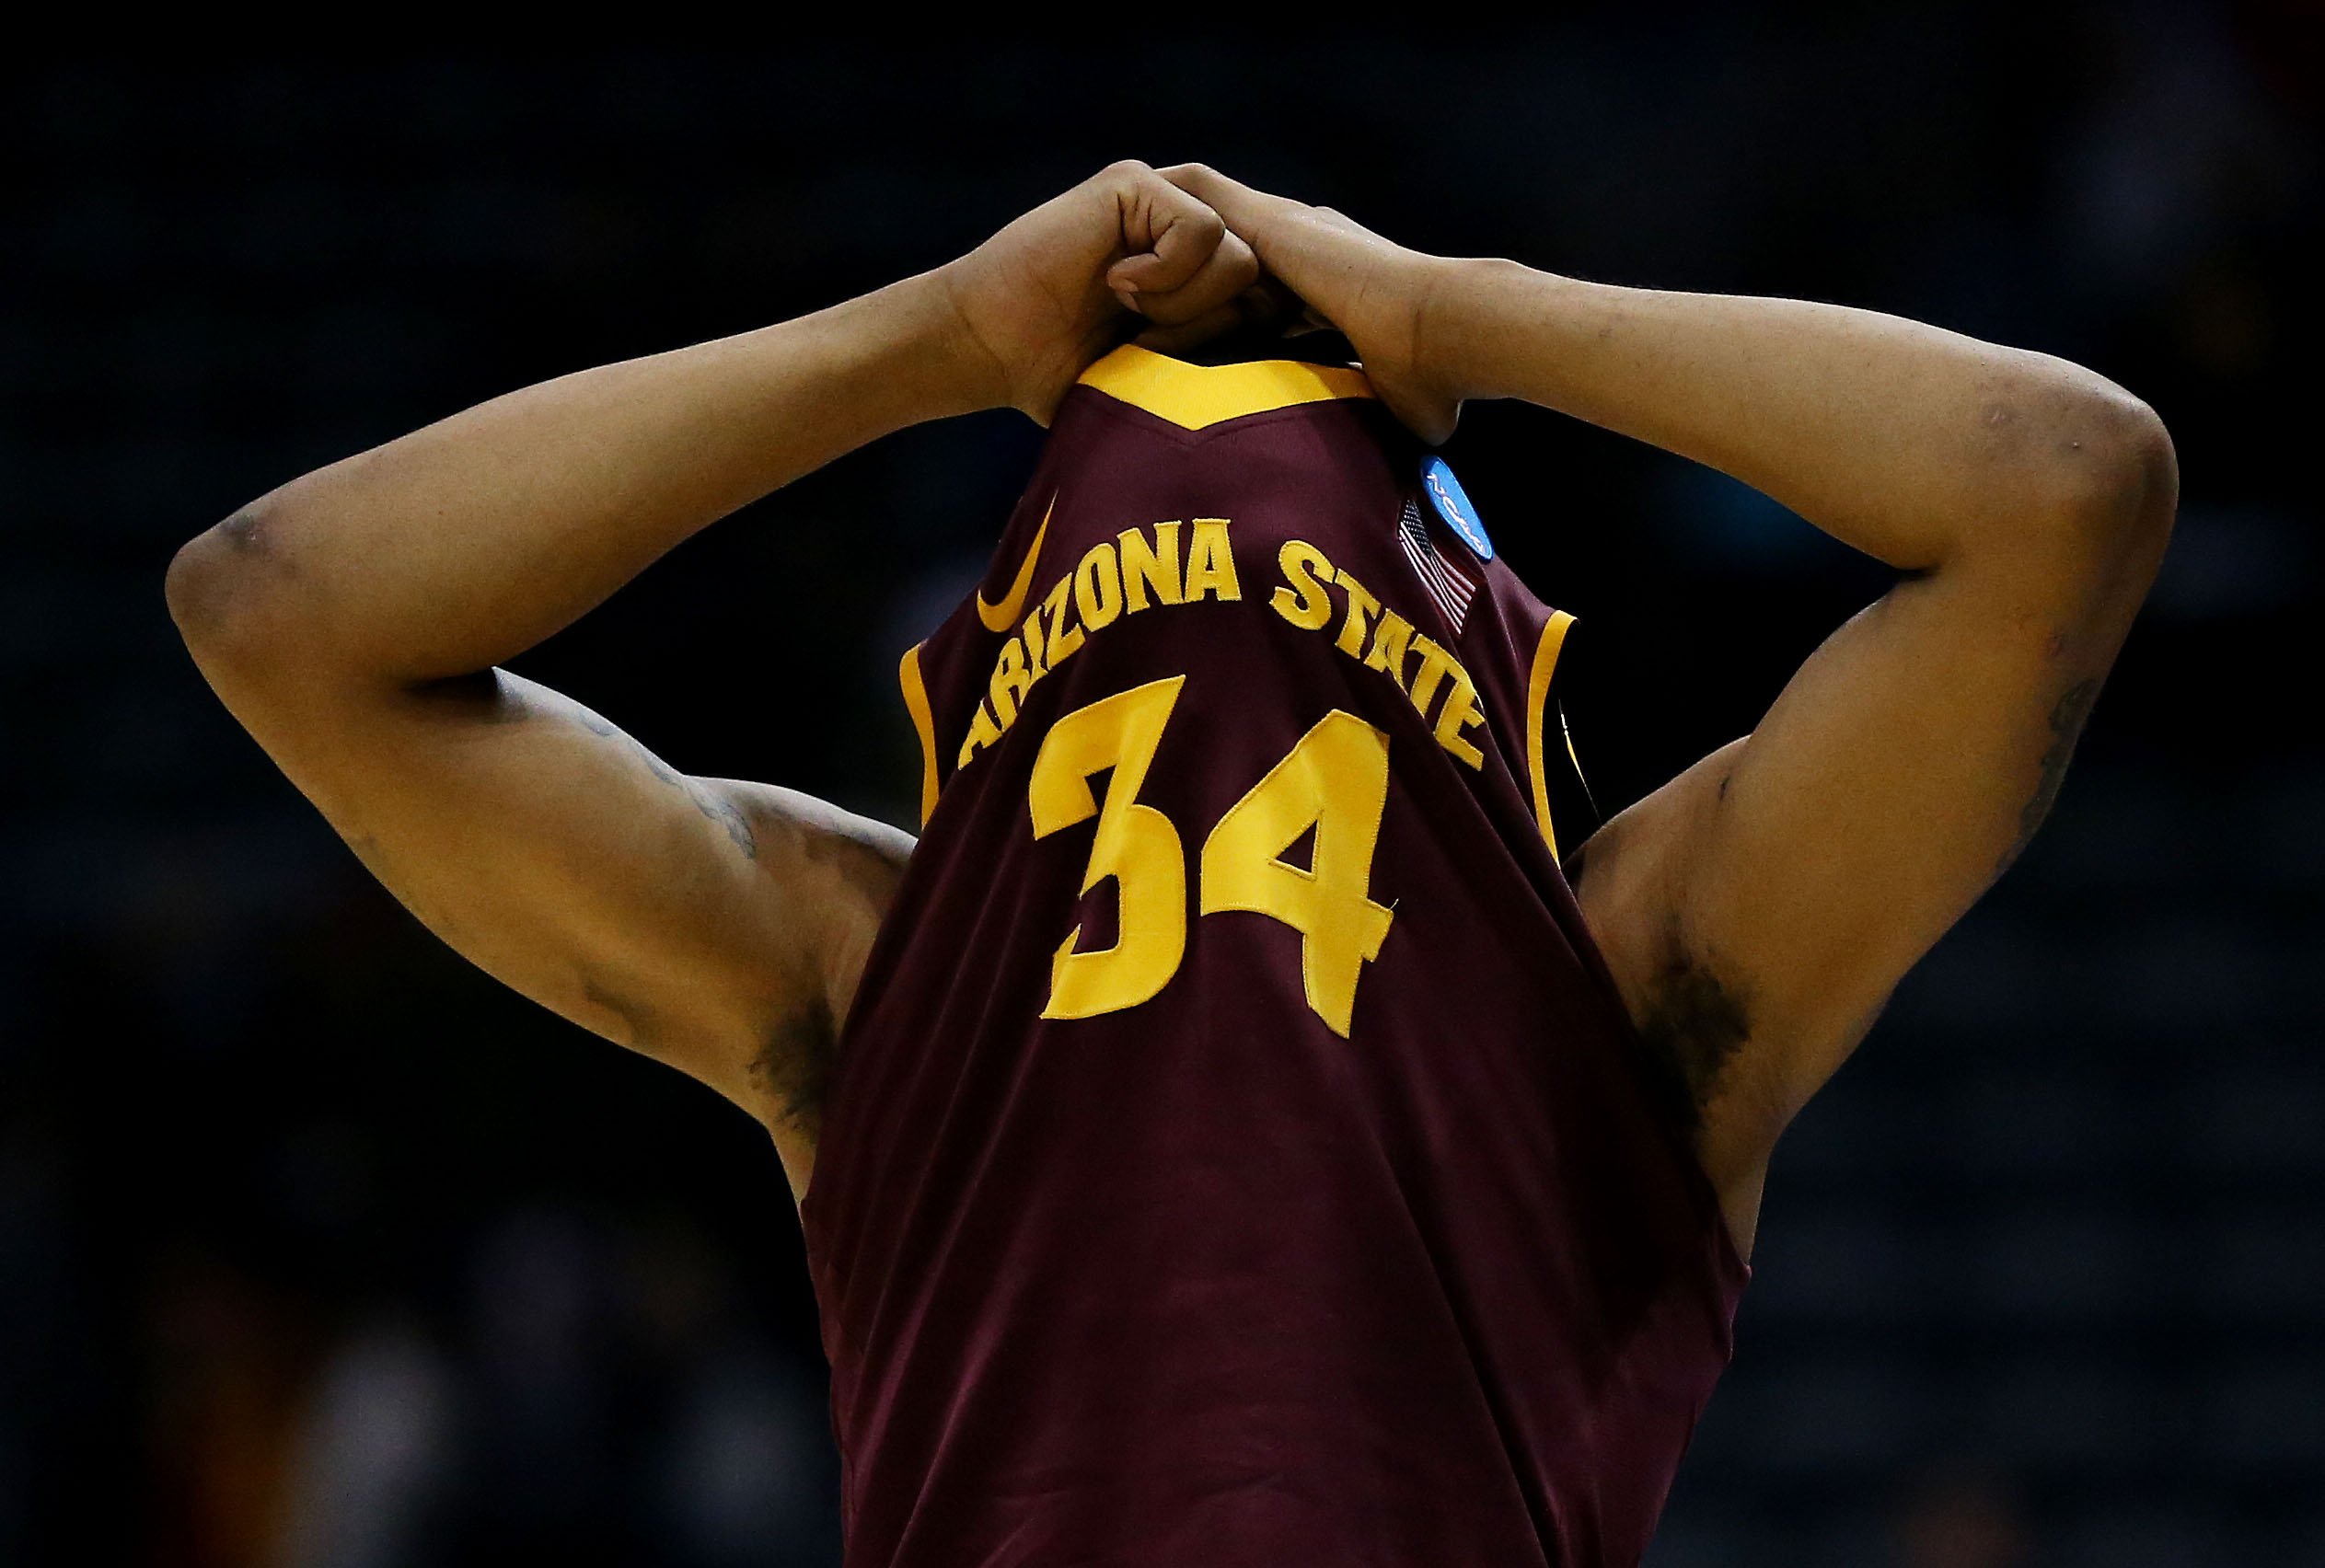 Jermaine Marshall of the Arizona State Sun Devils hides his face during their 87-85 loss to the Texas Longhorns during the second round of the 2014 NCAA Men's Basketball Tournament at BMO Harris Bradley Center on March 20, 2014 in Milwaukee.